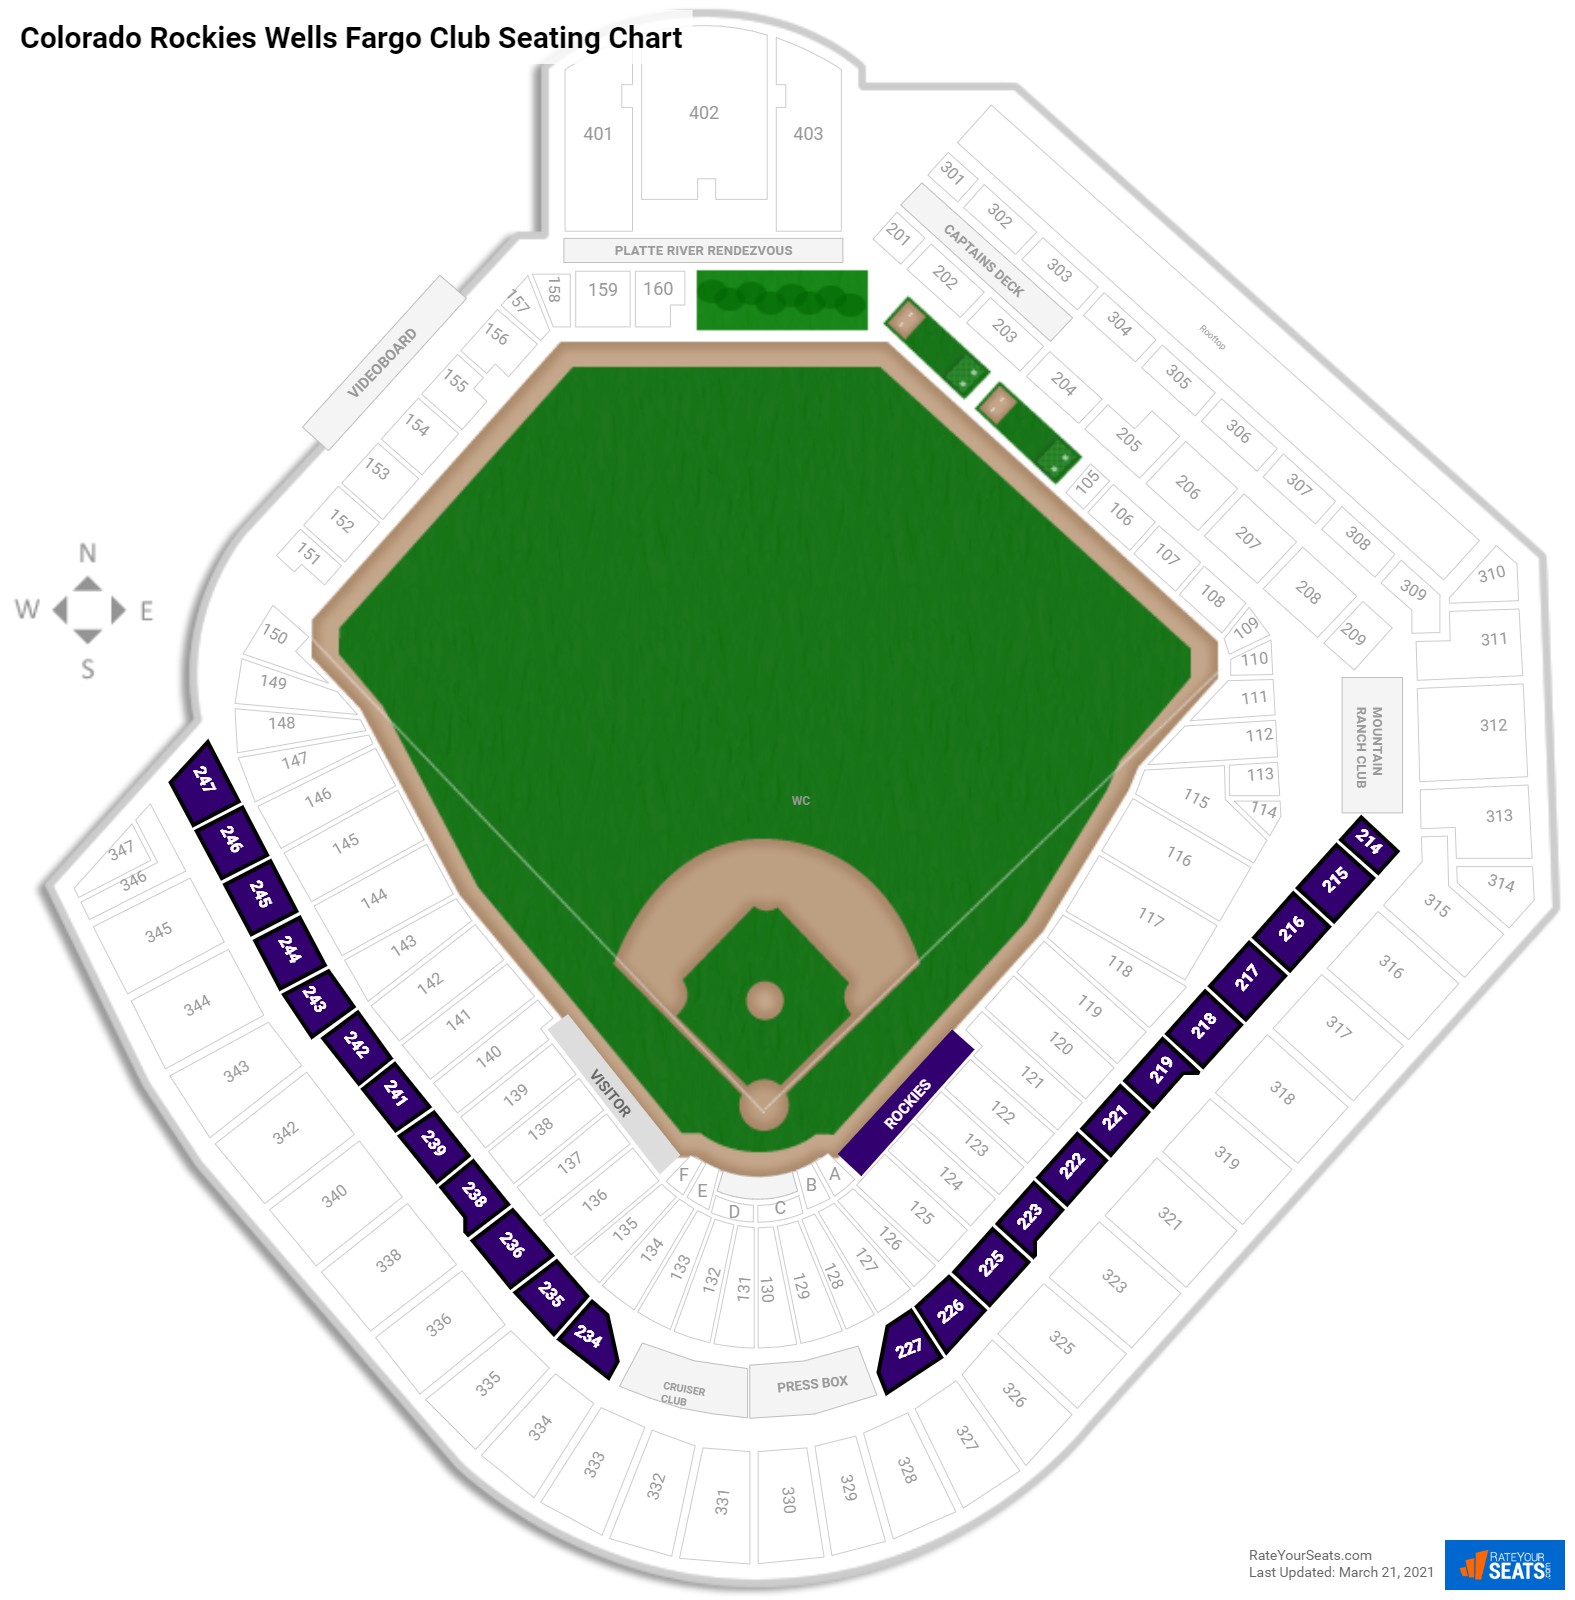 Detailed Coors Field Seating Chart